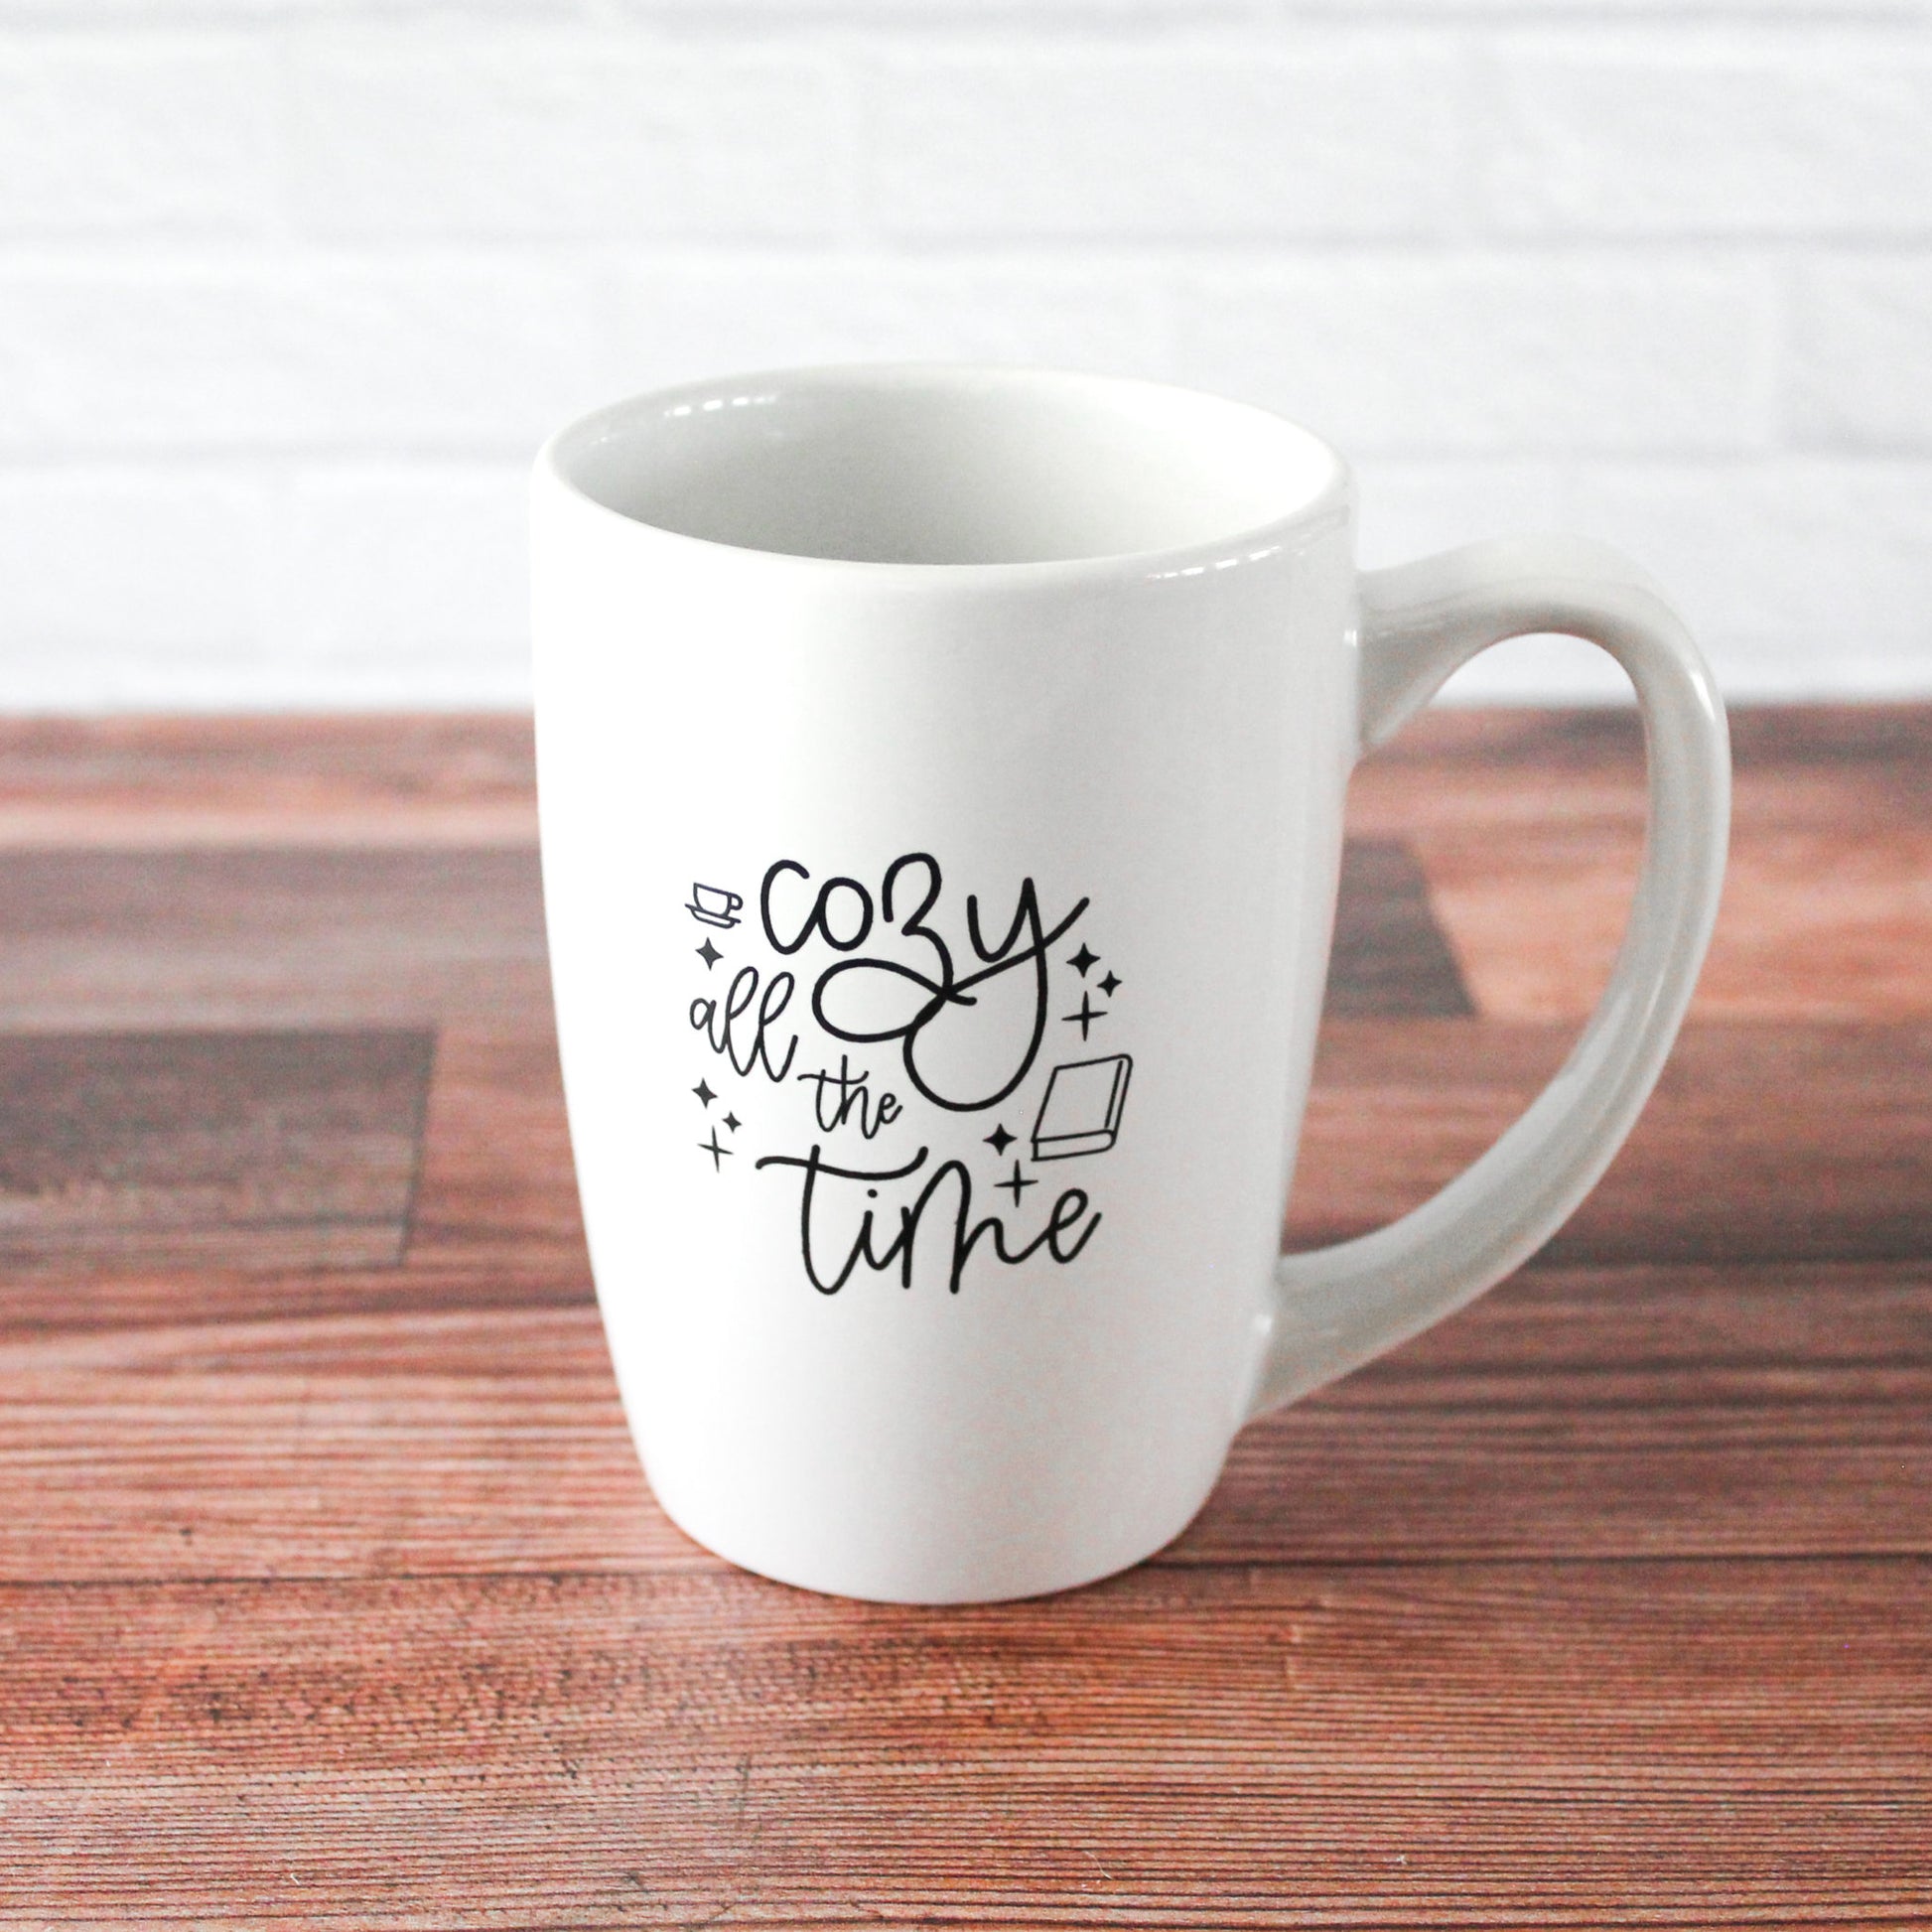 white mug with black script text reading "Cozy all the time" with graphics of a coffee mug & book